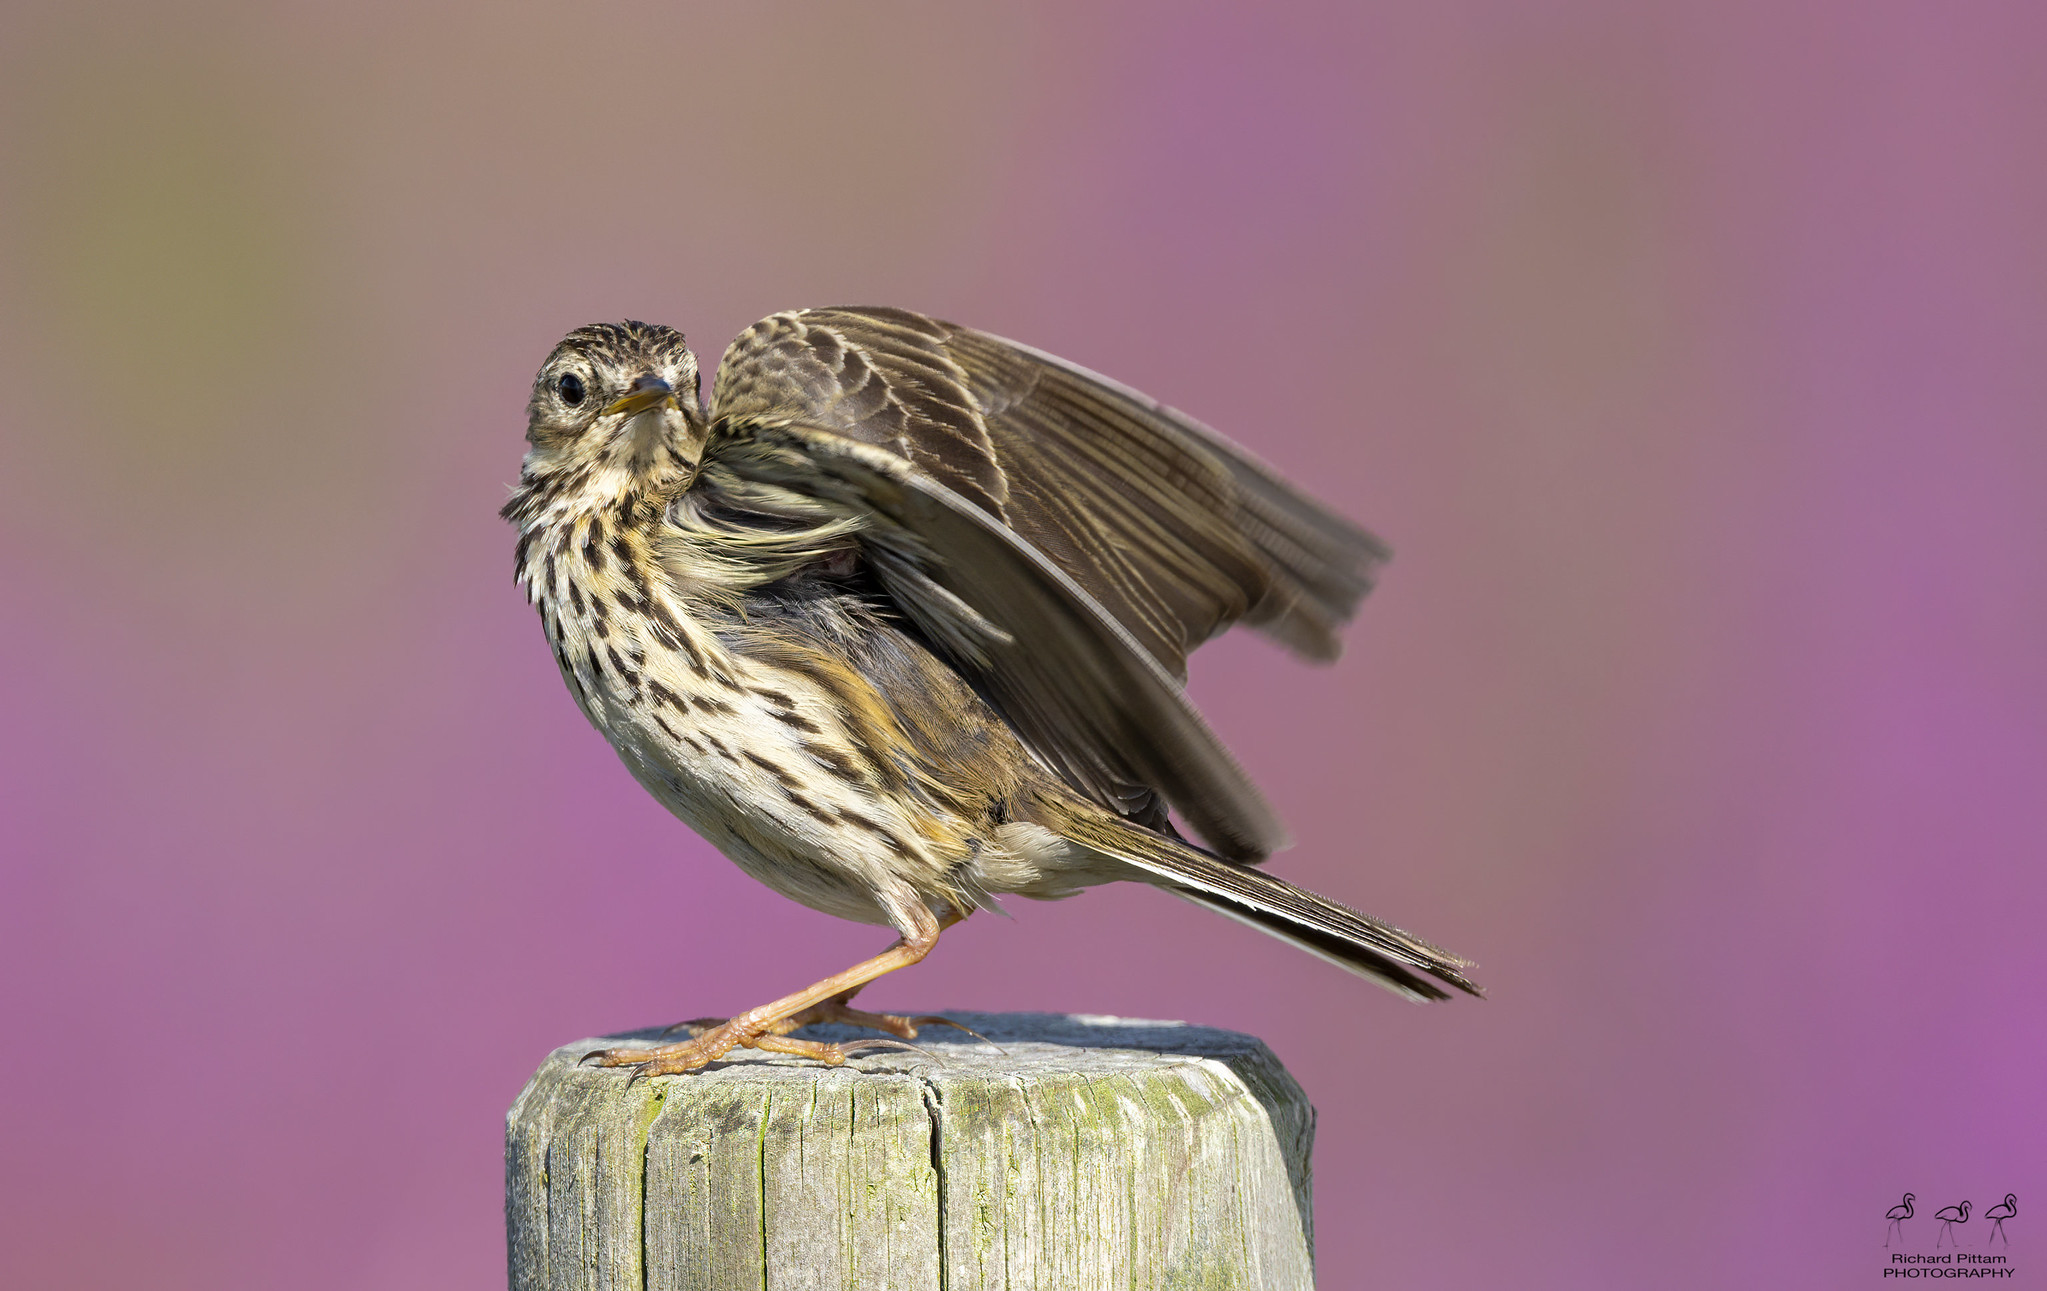 Meadow Pipit with Rose Bay Willow or fireweed as a colourful backdrop